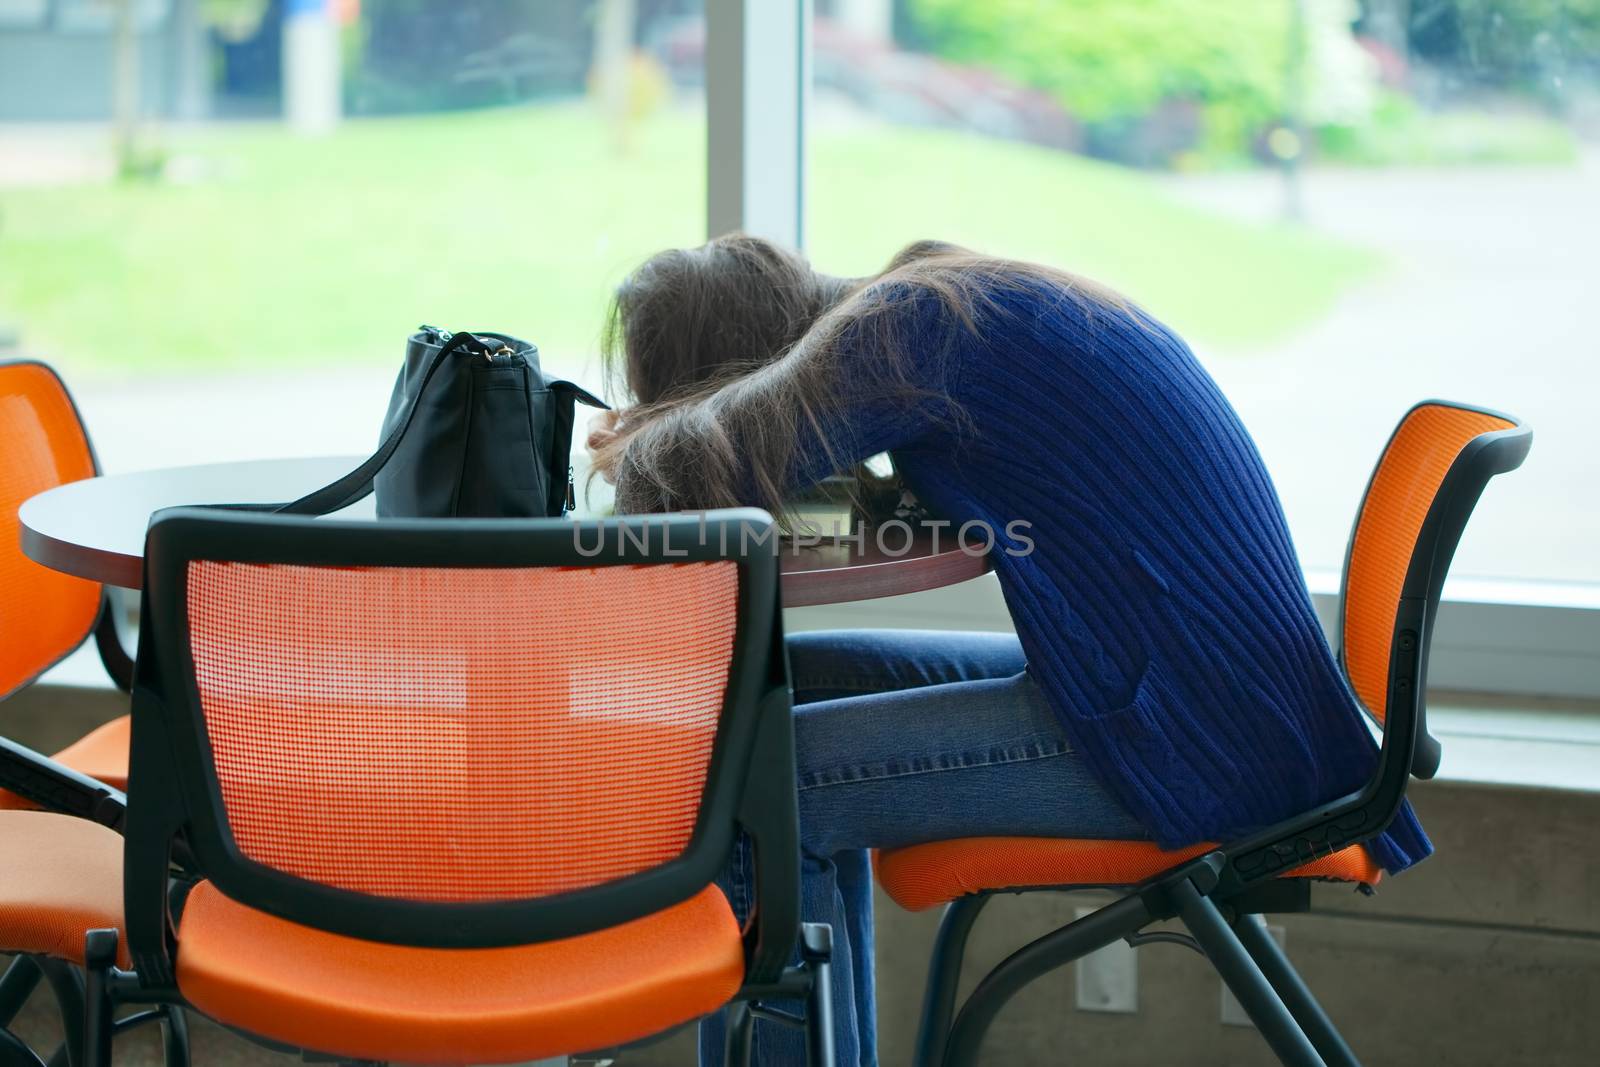 Tired student asleep at school table, head on book